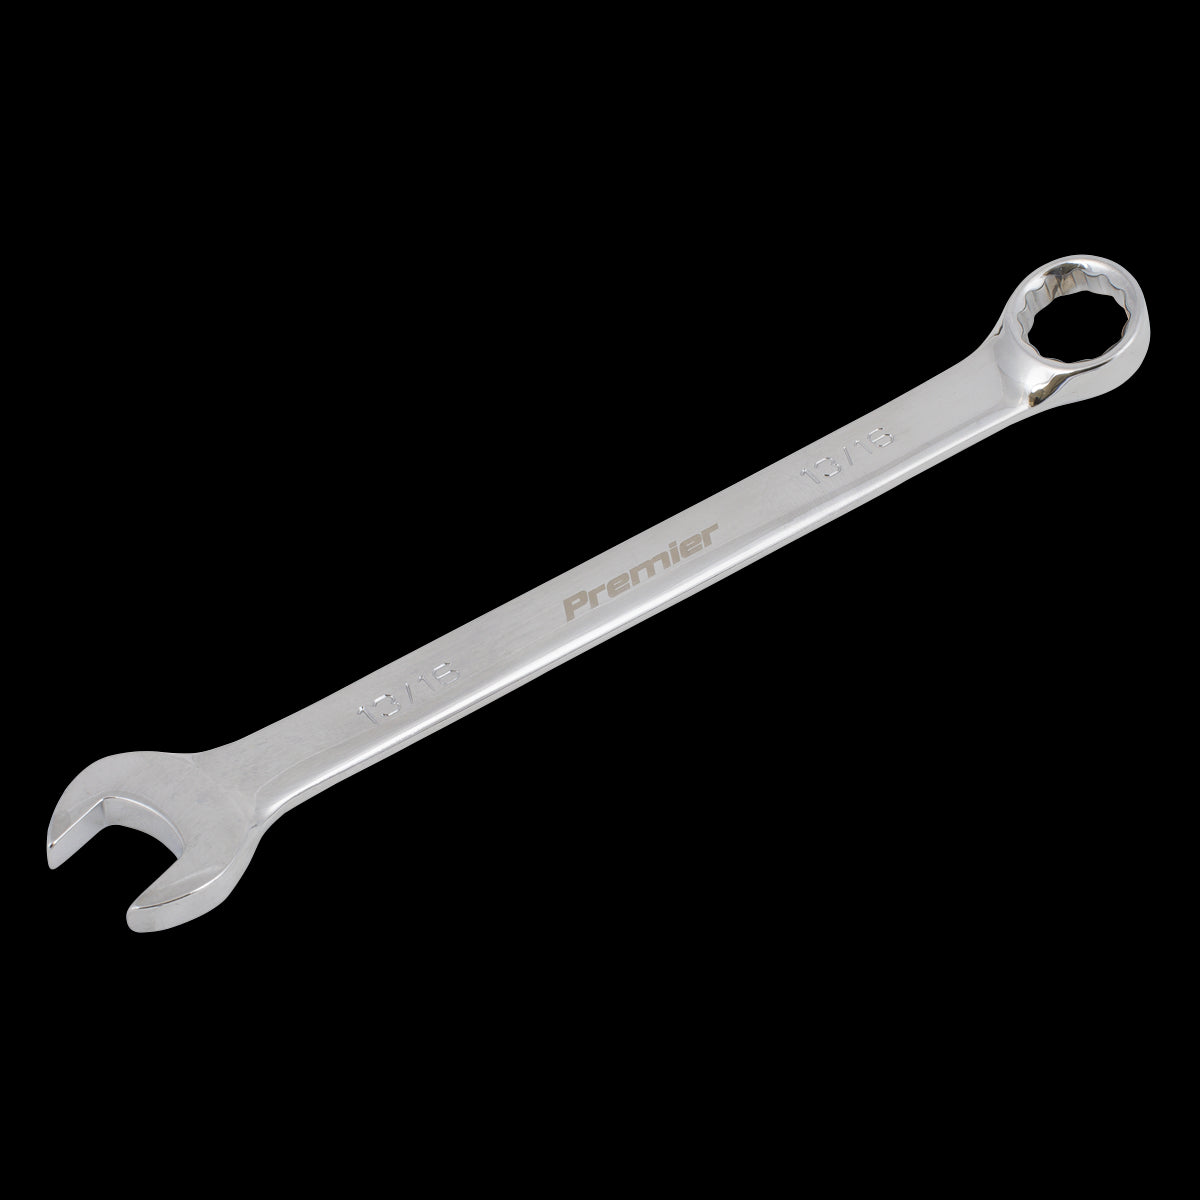 Sealey Premier Combination Spanner 13/16" - Imperial